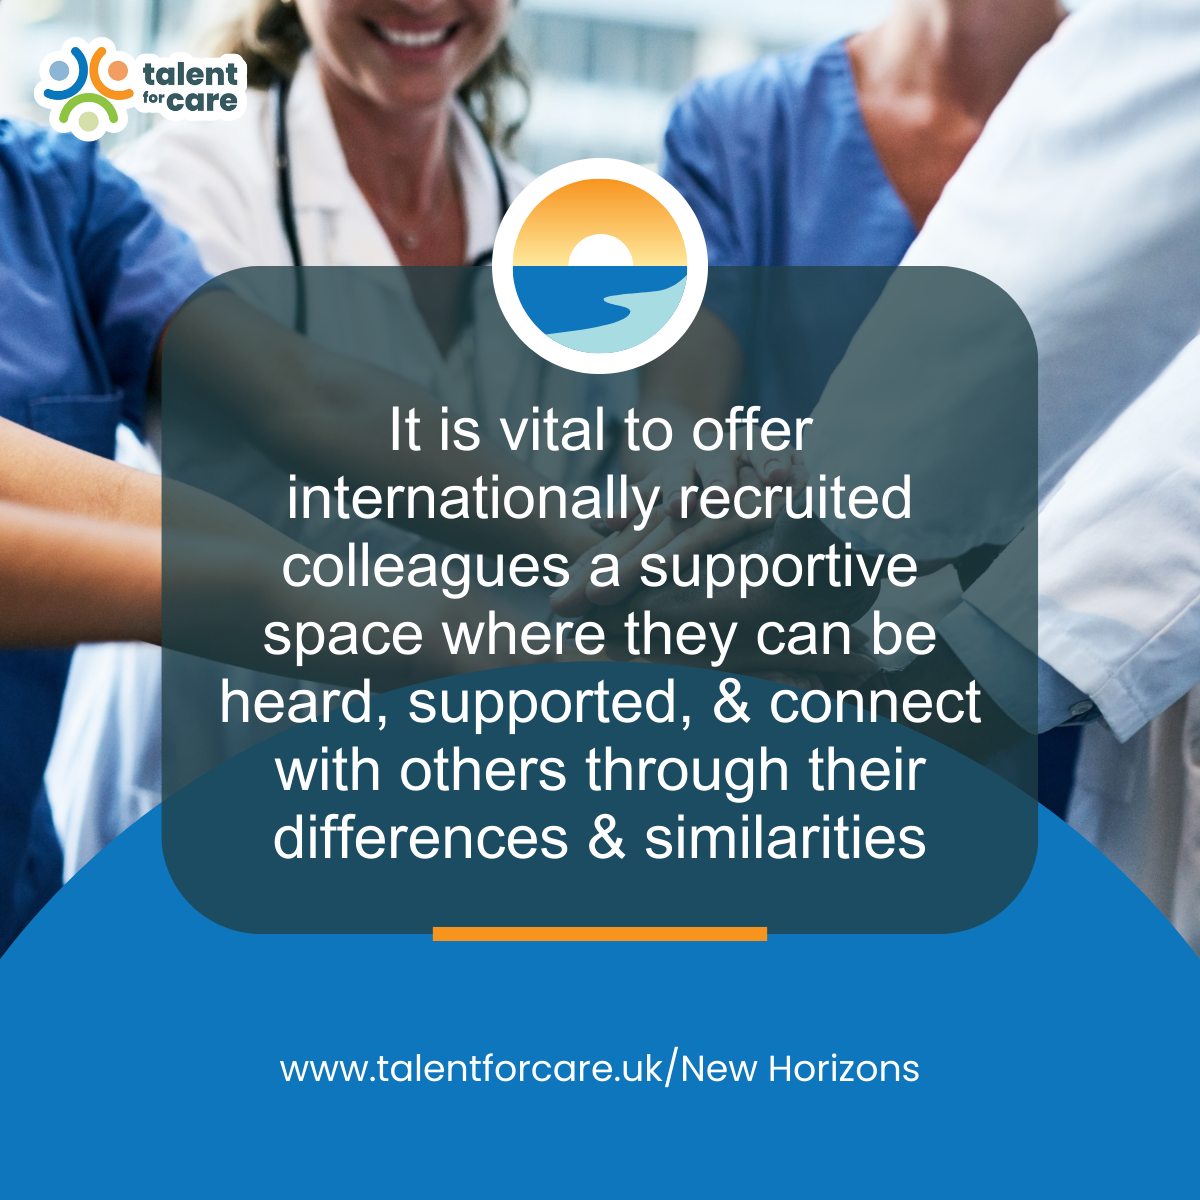 It is vital to offer internationally recruited colleagues a supportive space where they can be valued, supported, and connect with others through their differences and similarities